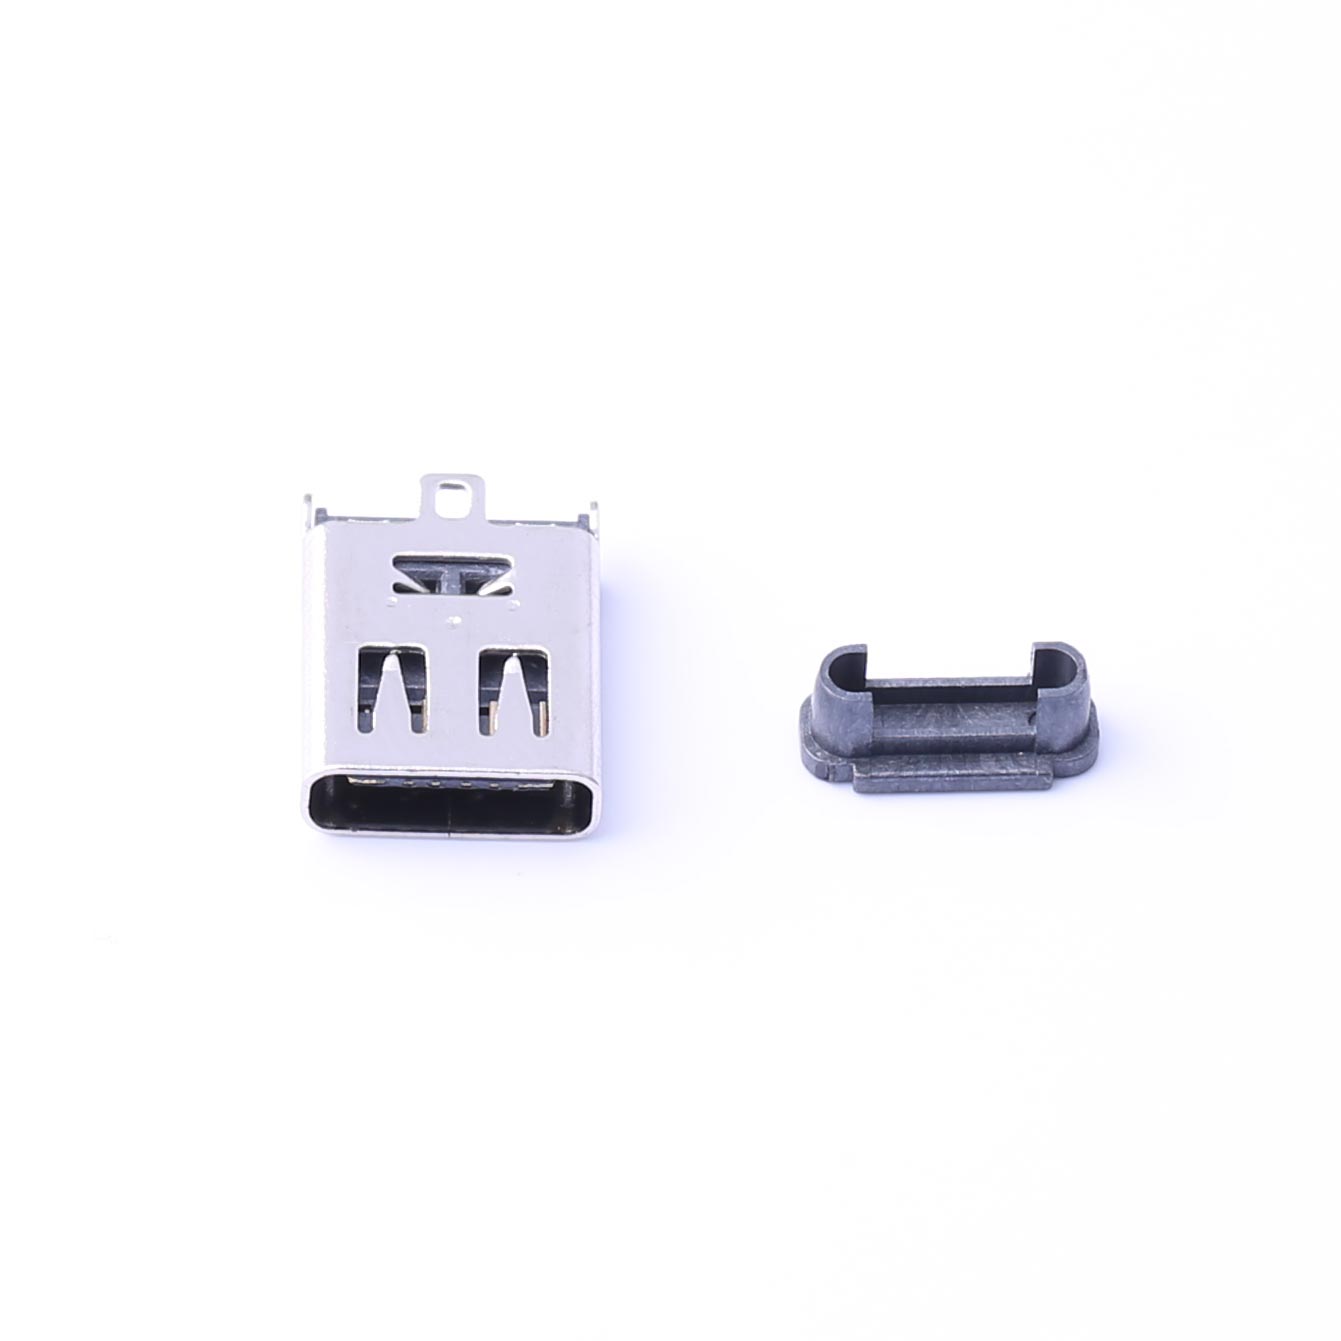 Kinghelm USB Type-C Connector base stand-up sticker - KH-type-c-l10.5-6p-STM